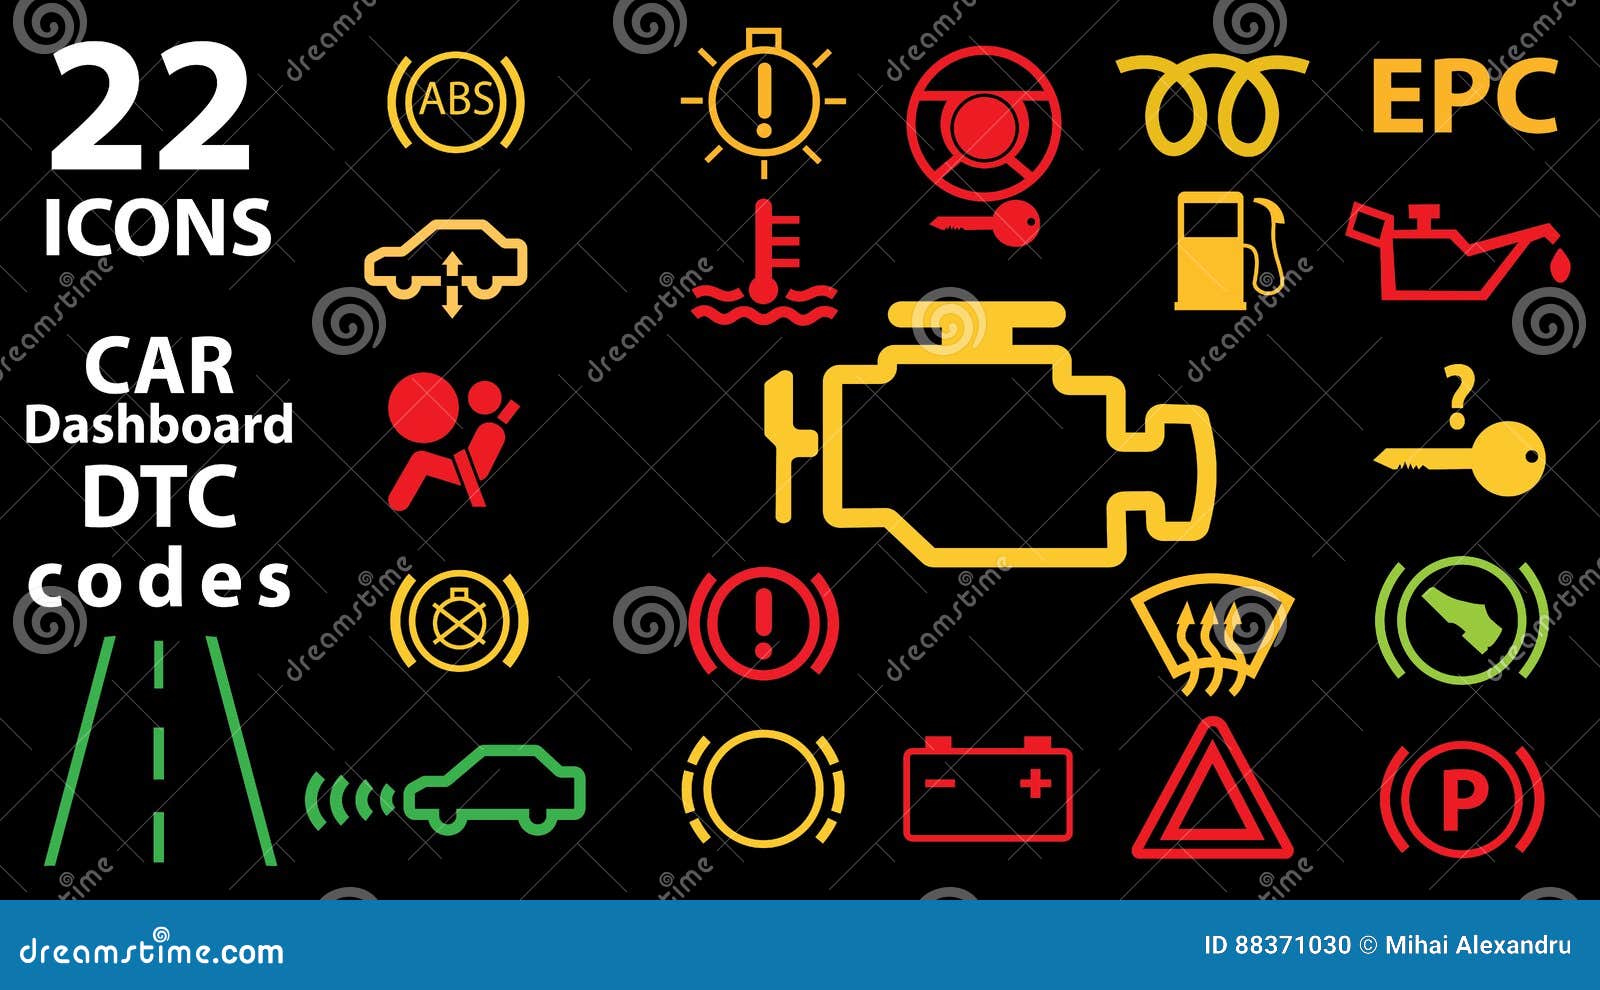 22 Icon Collection of Car Dashboard Panel Indicators, Yellow Red Green  Indicators. DTC Codes. Check Engine Warning. Stock Illustration -  Illustration of safety, interface: 88371030